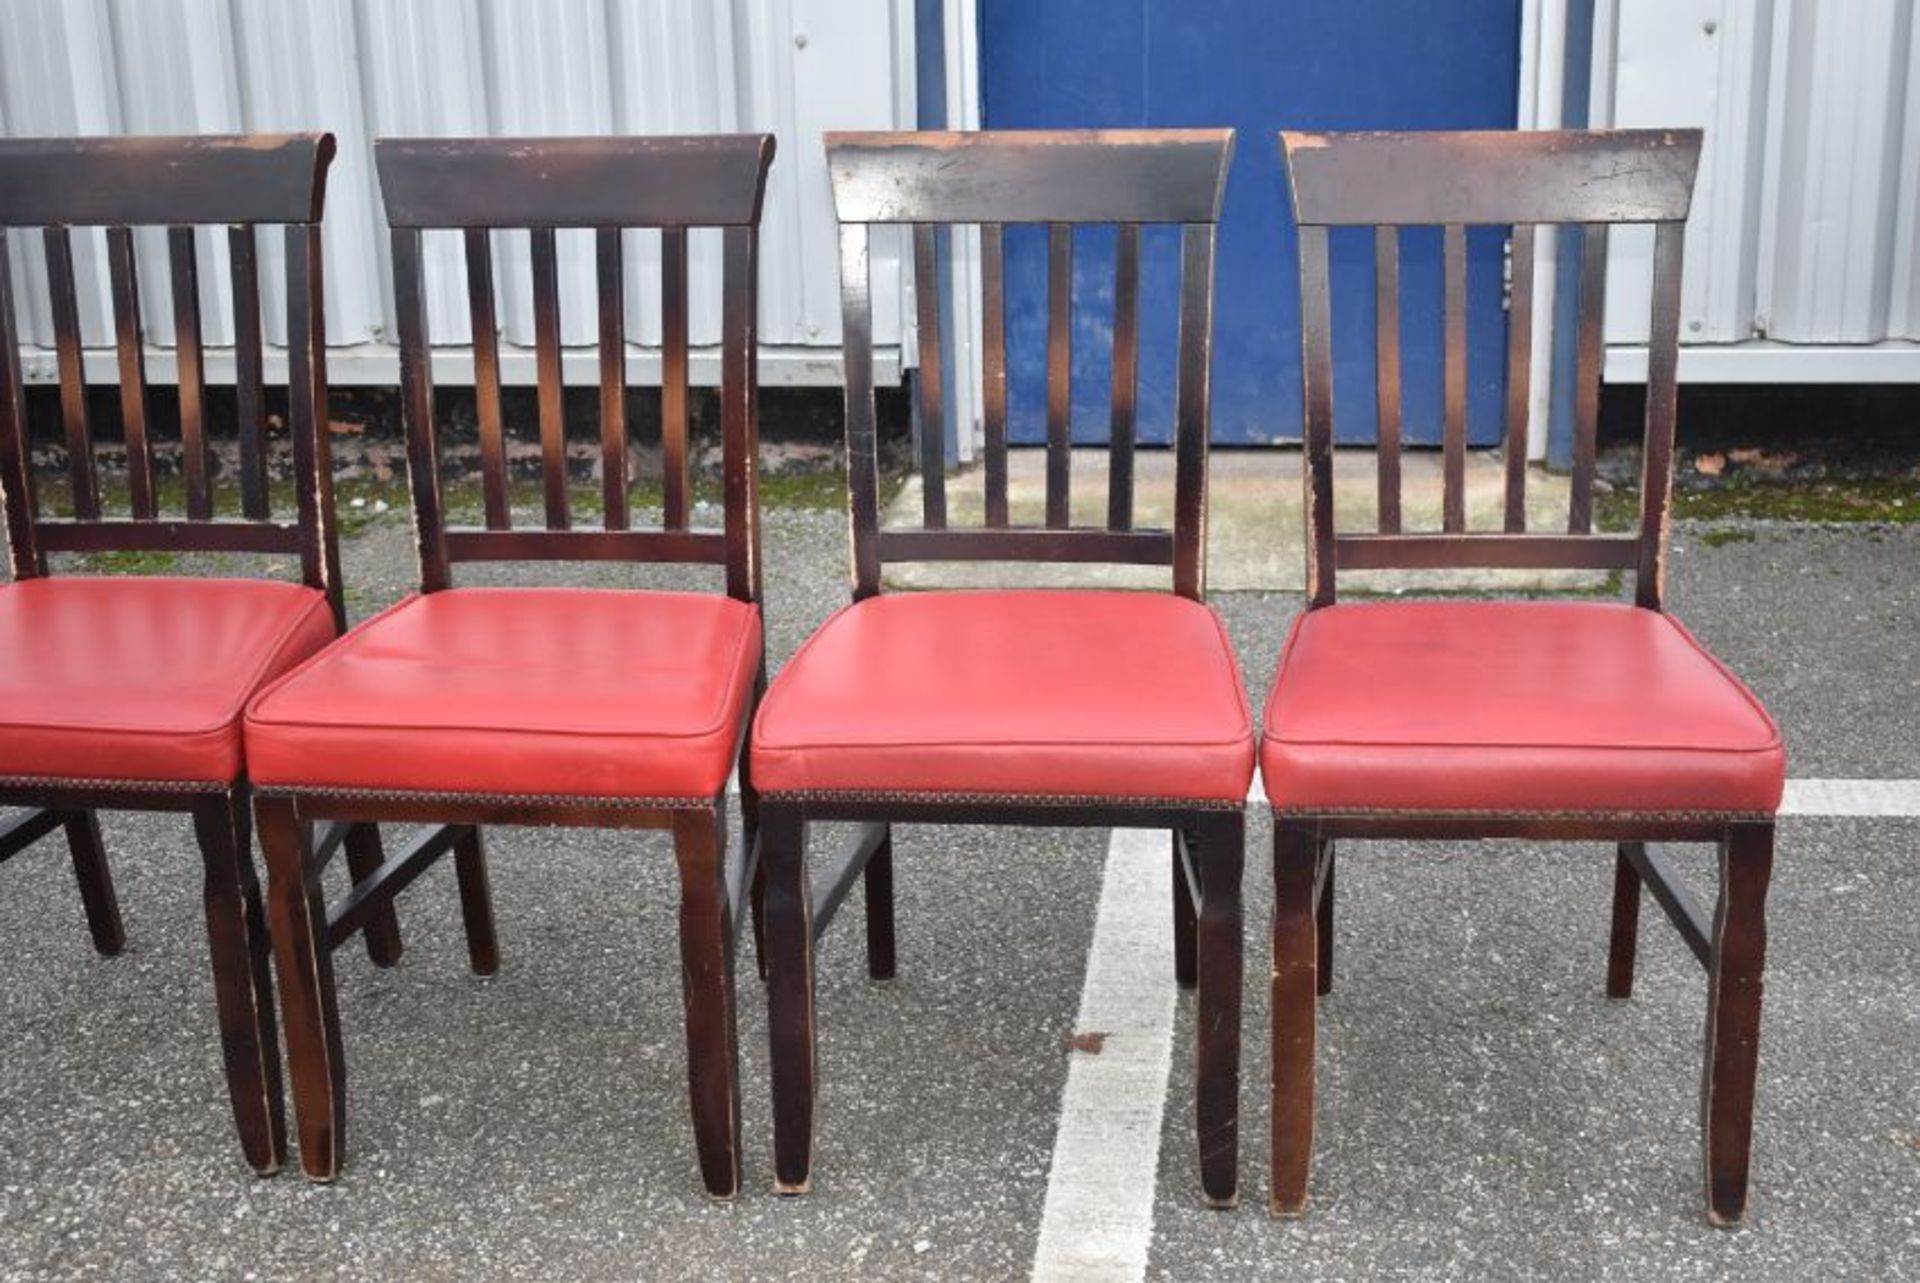 16 x Restaurant Dining Chairs With Dark Stained Wood Finish and Red Leather Seat Pads - Recently - Image 2 of 6